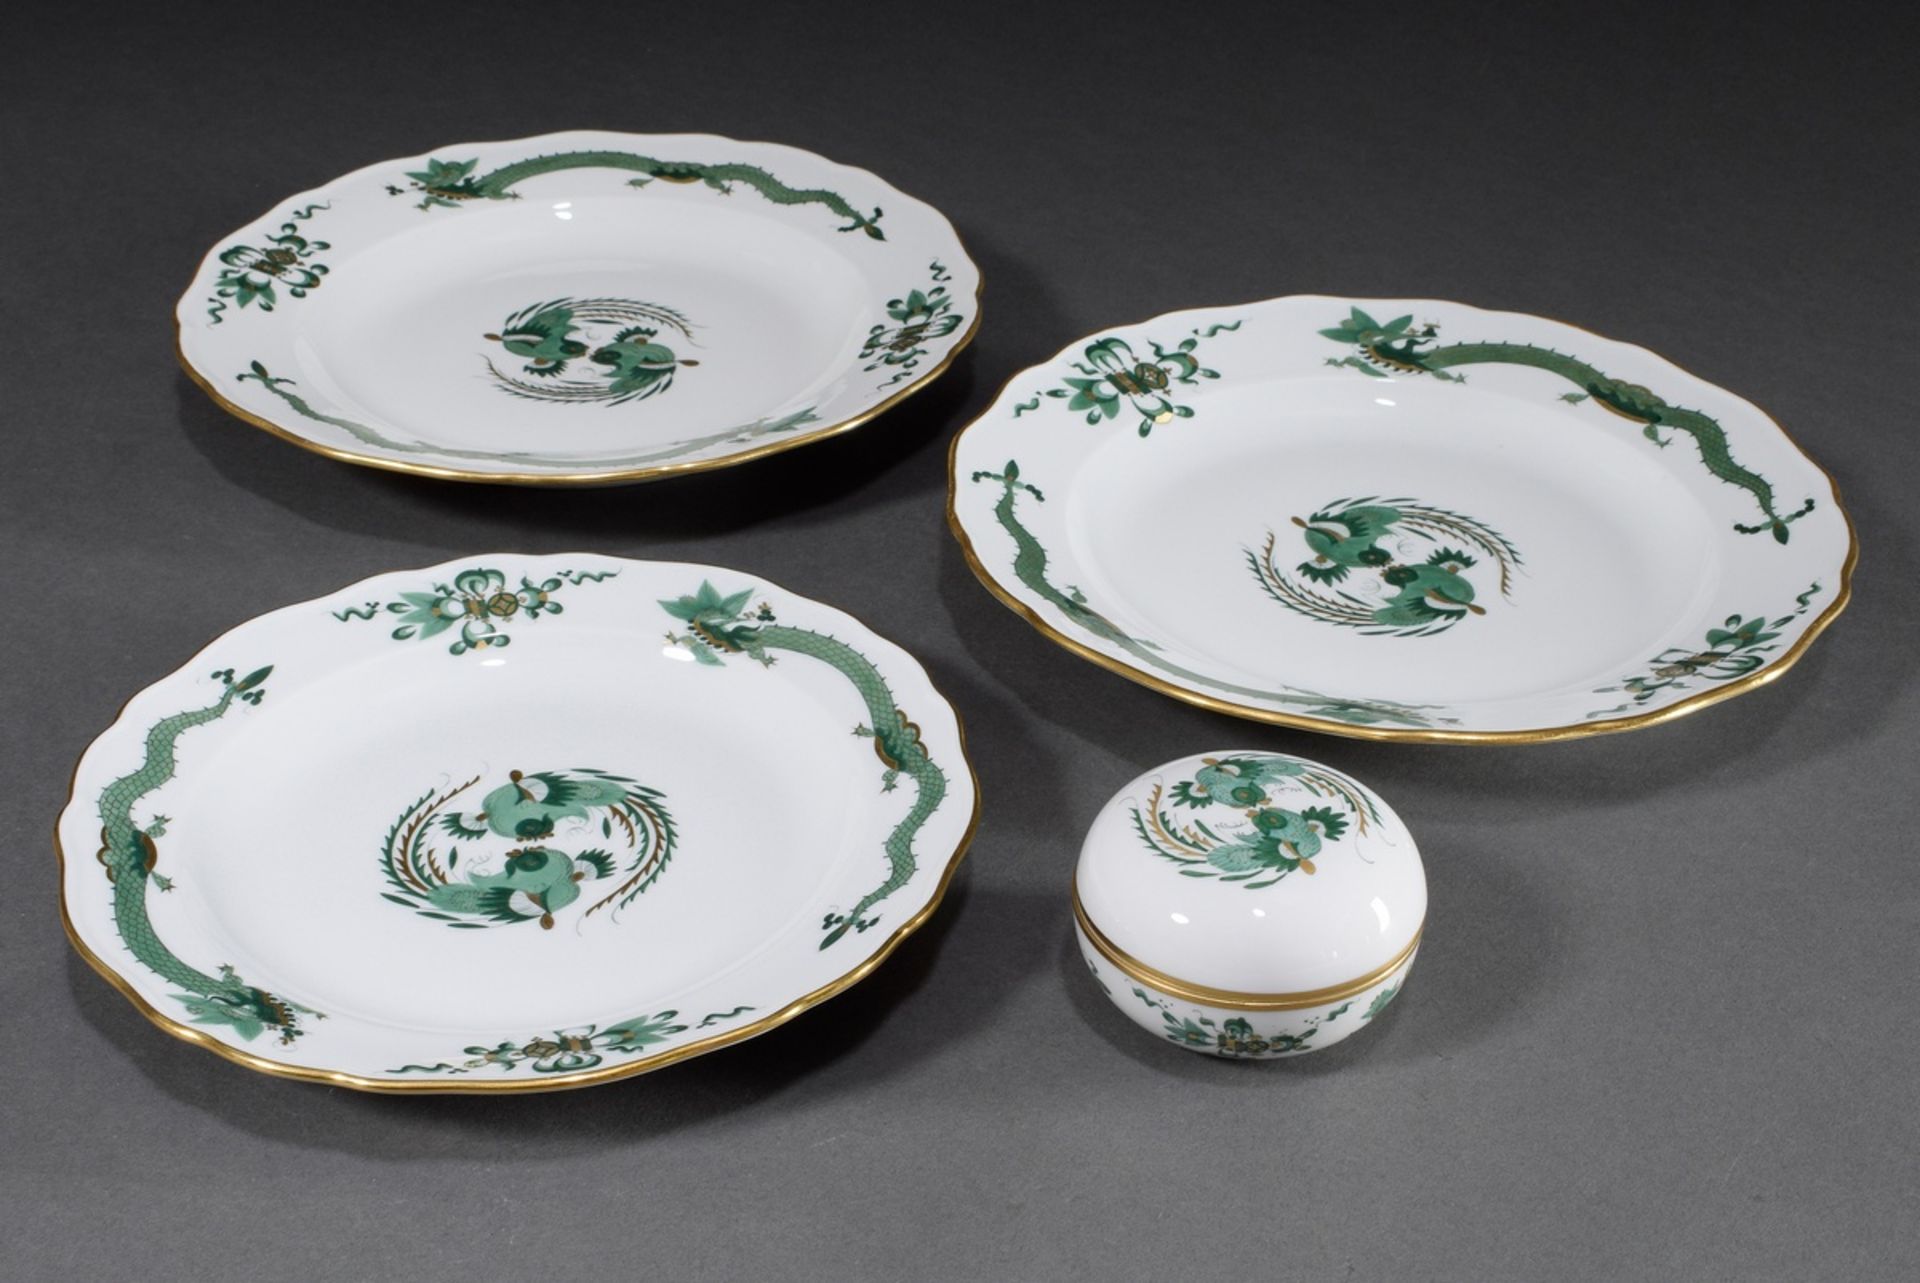 4 Various pieces Meissen "Rich green dragon" with gold rim, 20th century: 3 plates (Ø 21/25cm) and  - Image 2 of 3